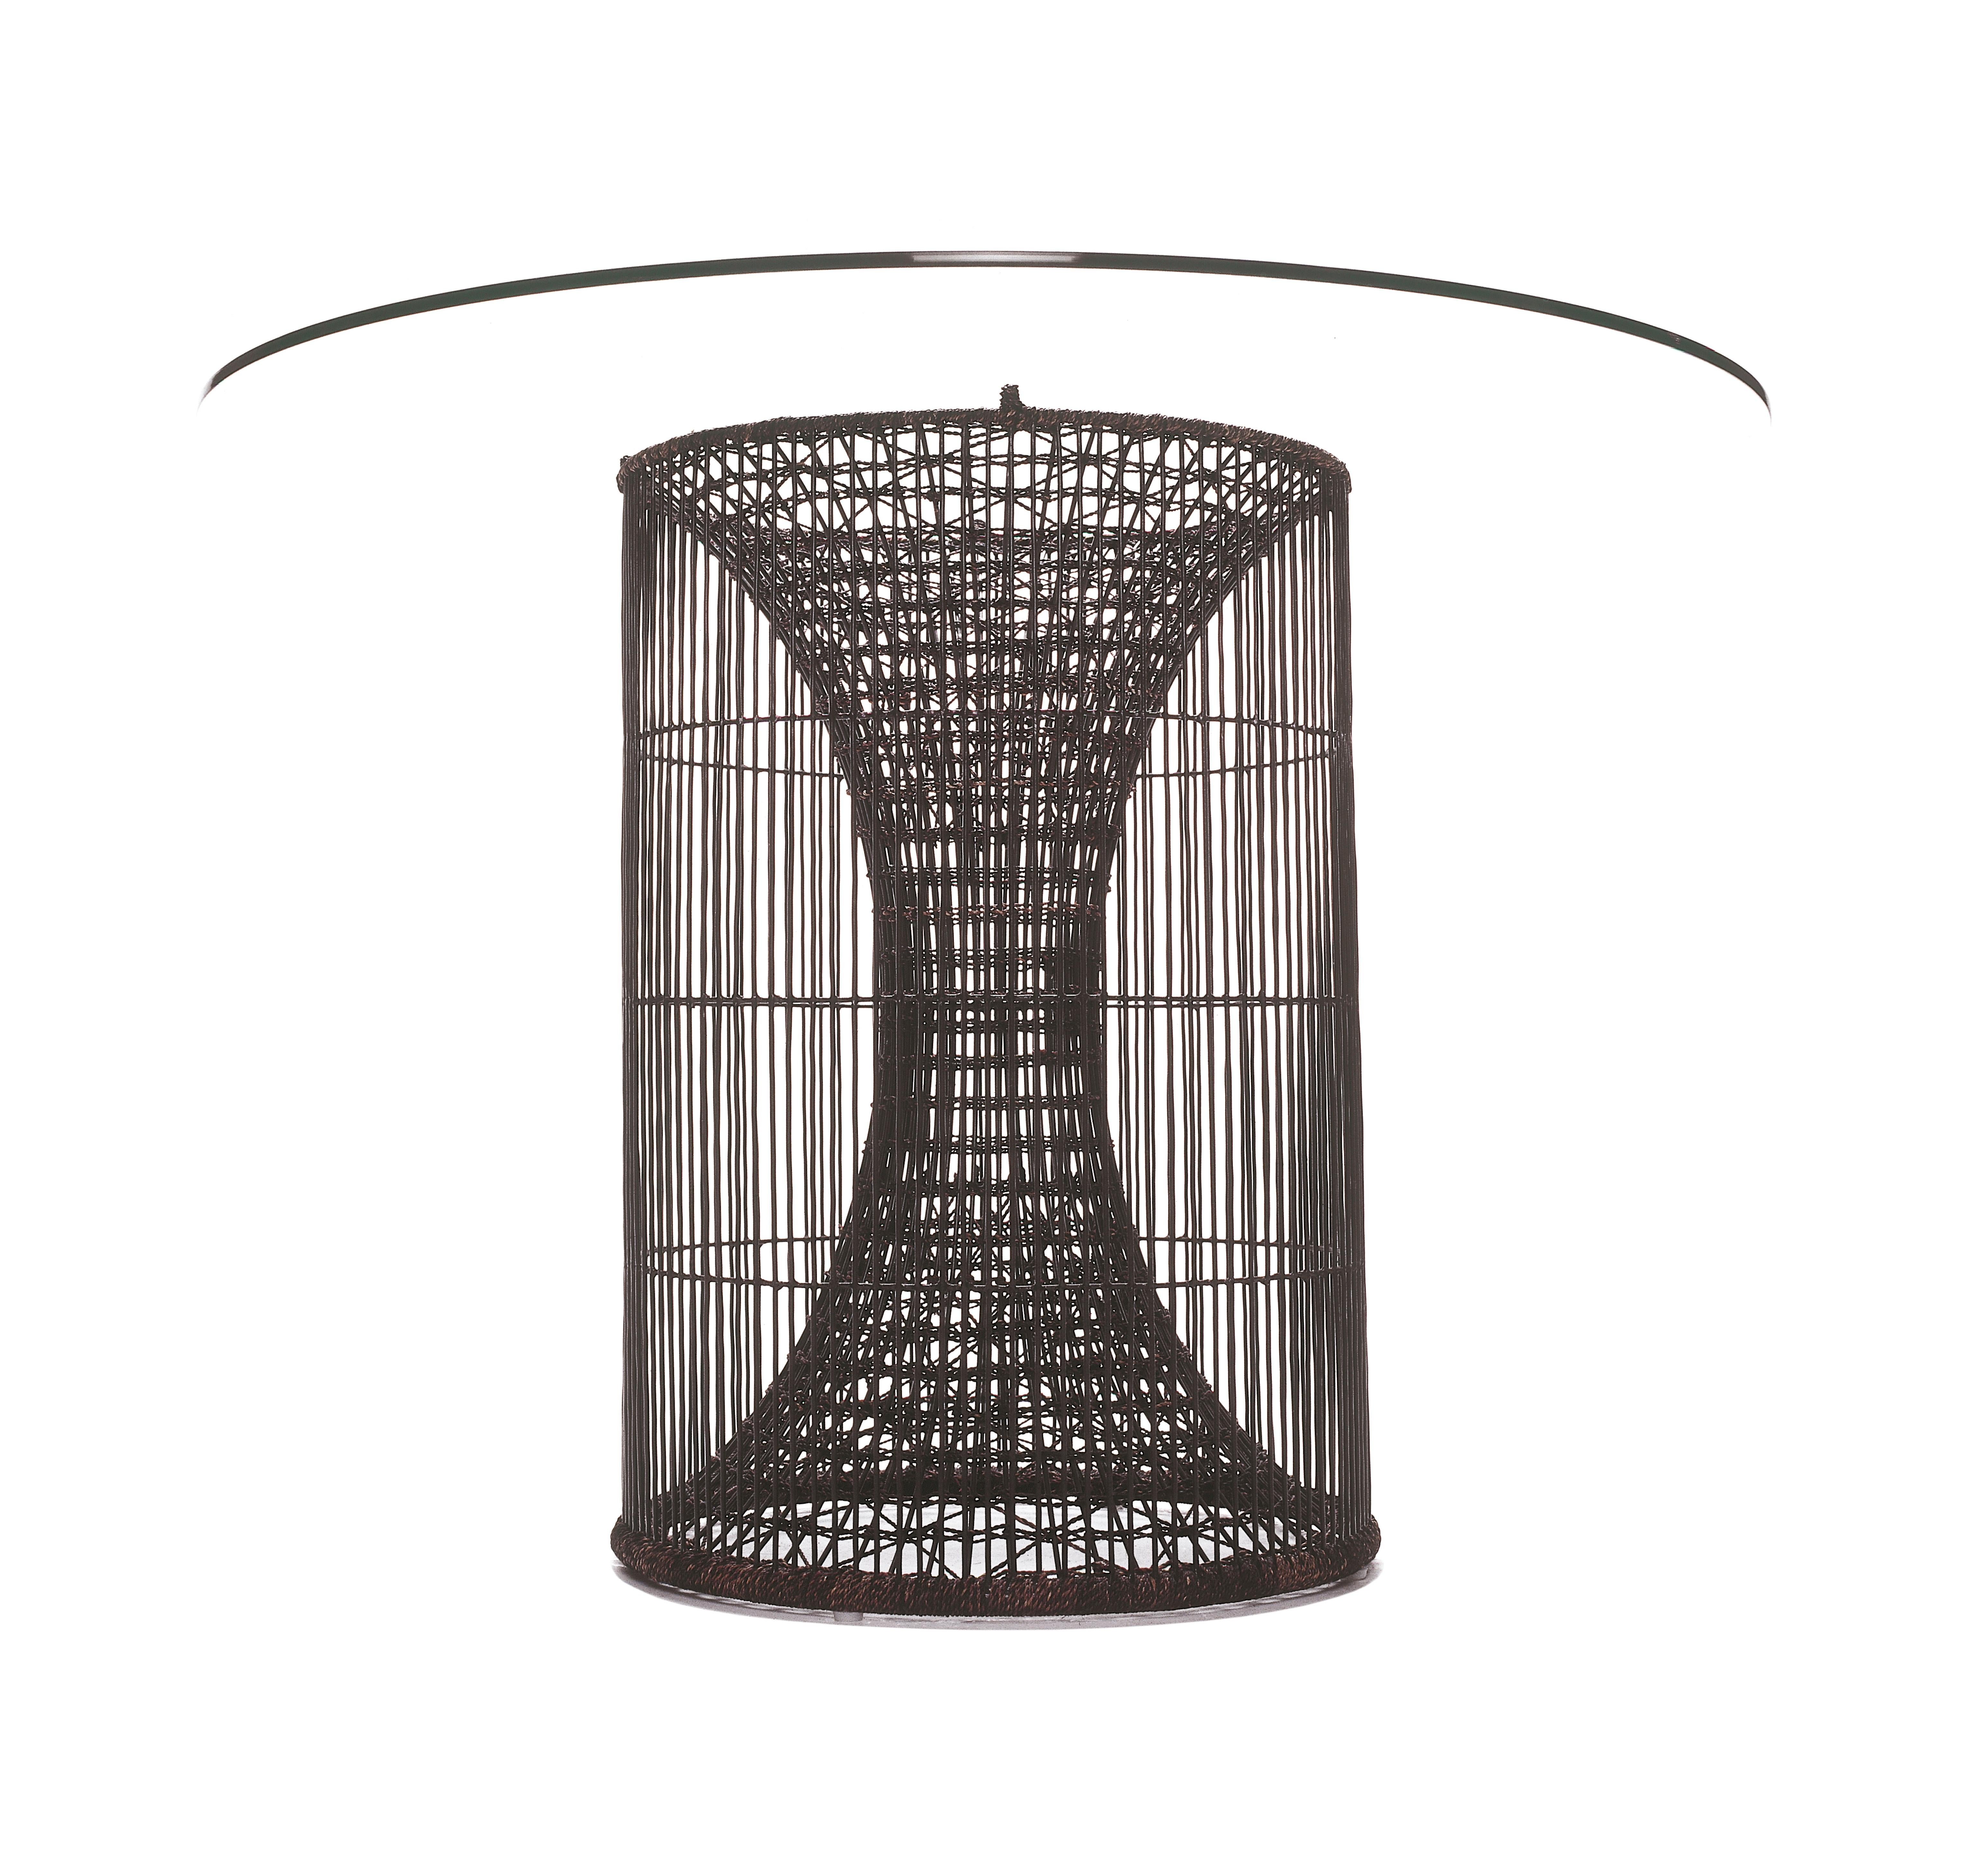 Amaya large dining table by Kenneth Cobonpue
Materials: Polyethelene. Steel. Glass.
Dimensions: 
Table diameter 76 cm x height 74 cm
Glass diameter 137cm x height 1cm

Inspired by fish traps, the Amaya tables resemble a vortex enclosed within